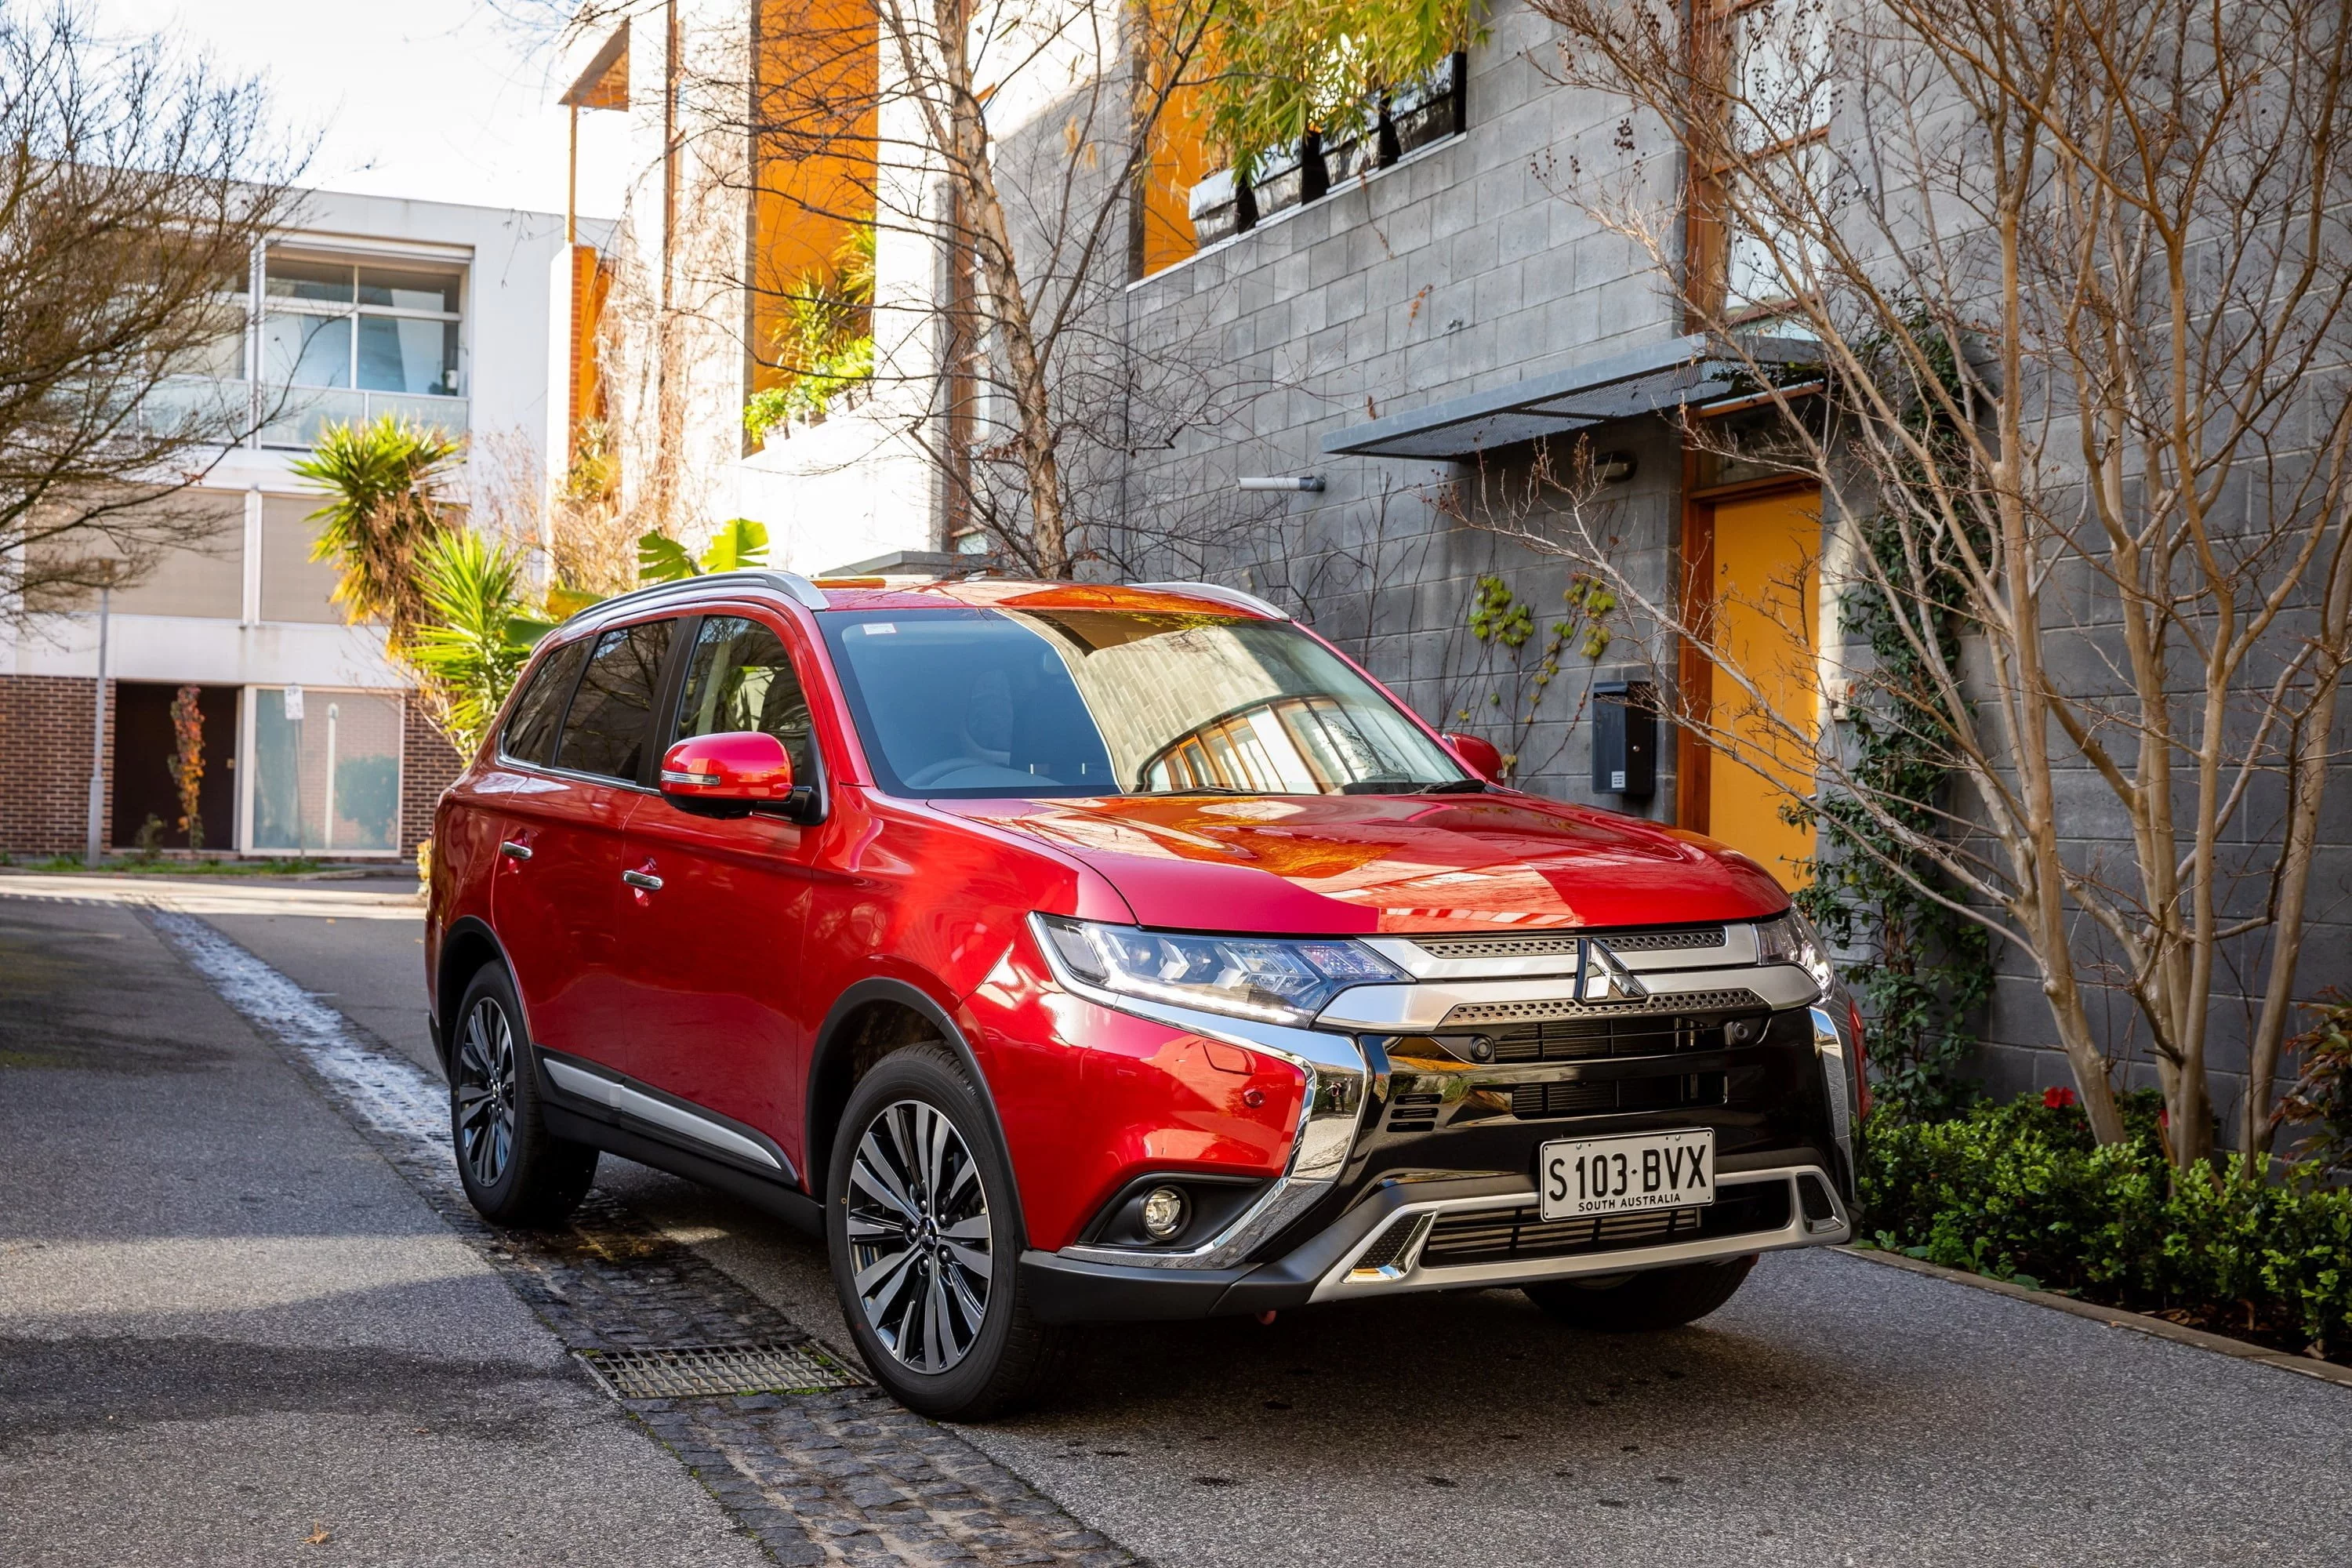 2019 MiTsubishi Outlander Exceed 12 front